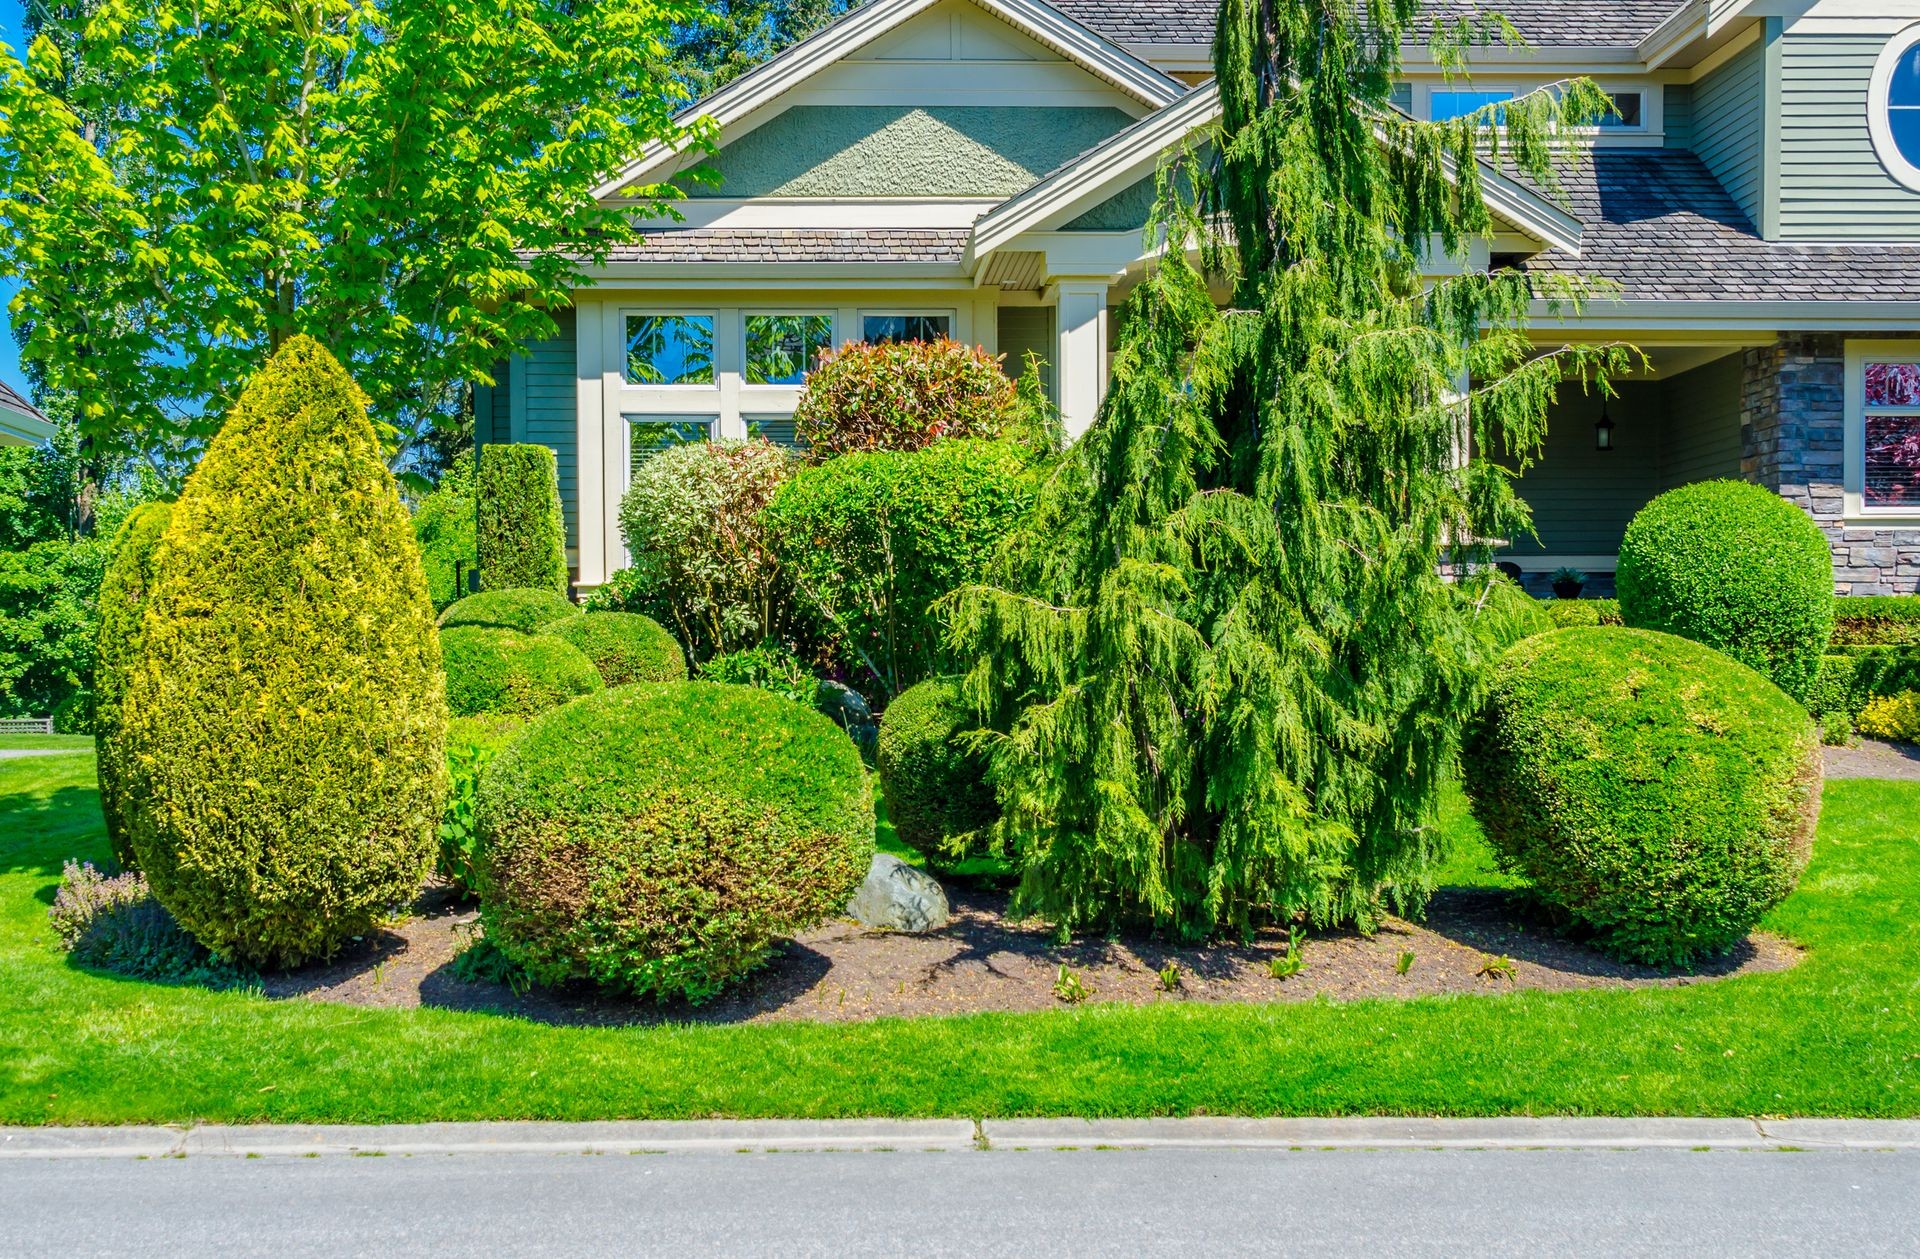 Flowers, nicely trimmed bushes in front of the house, front yard. Landscape design.